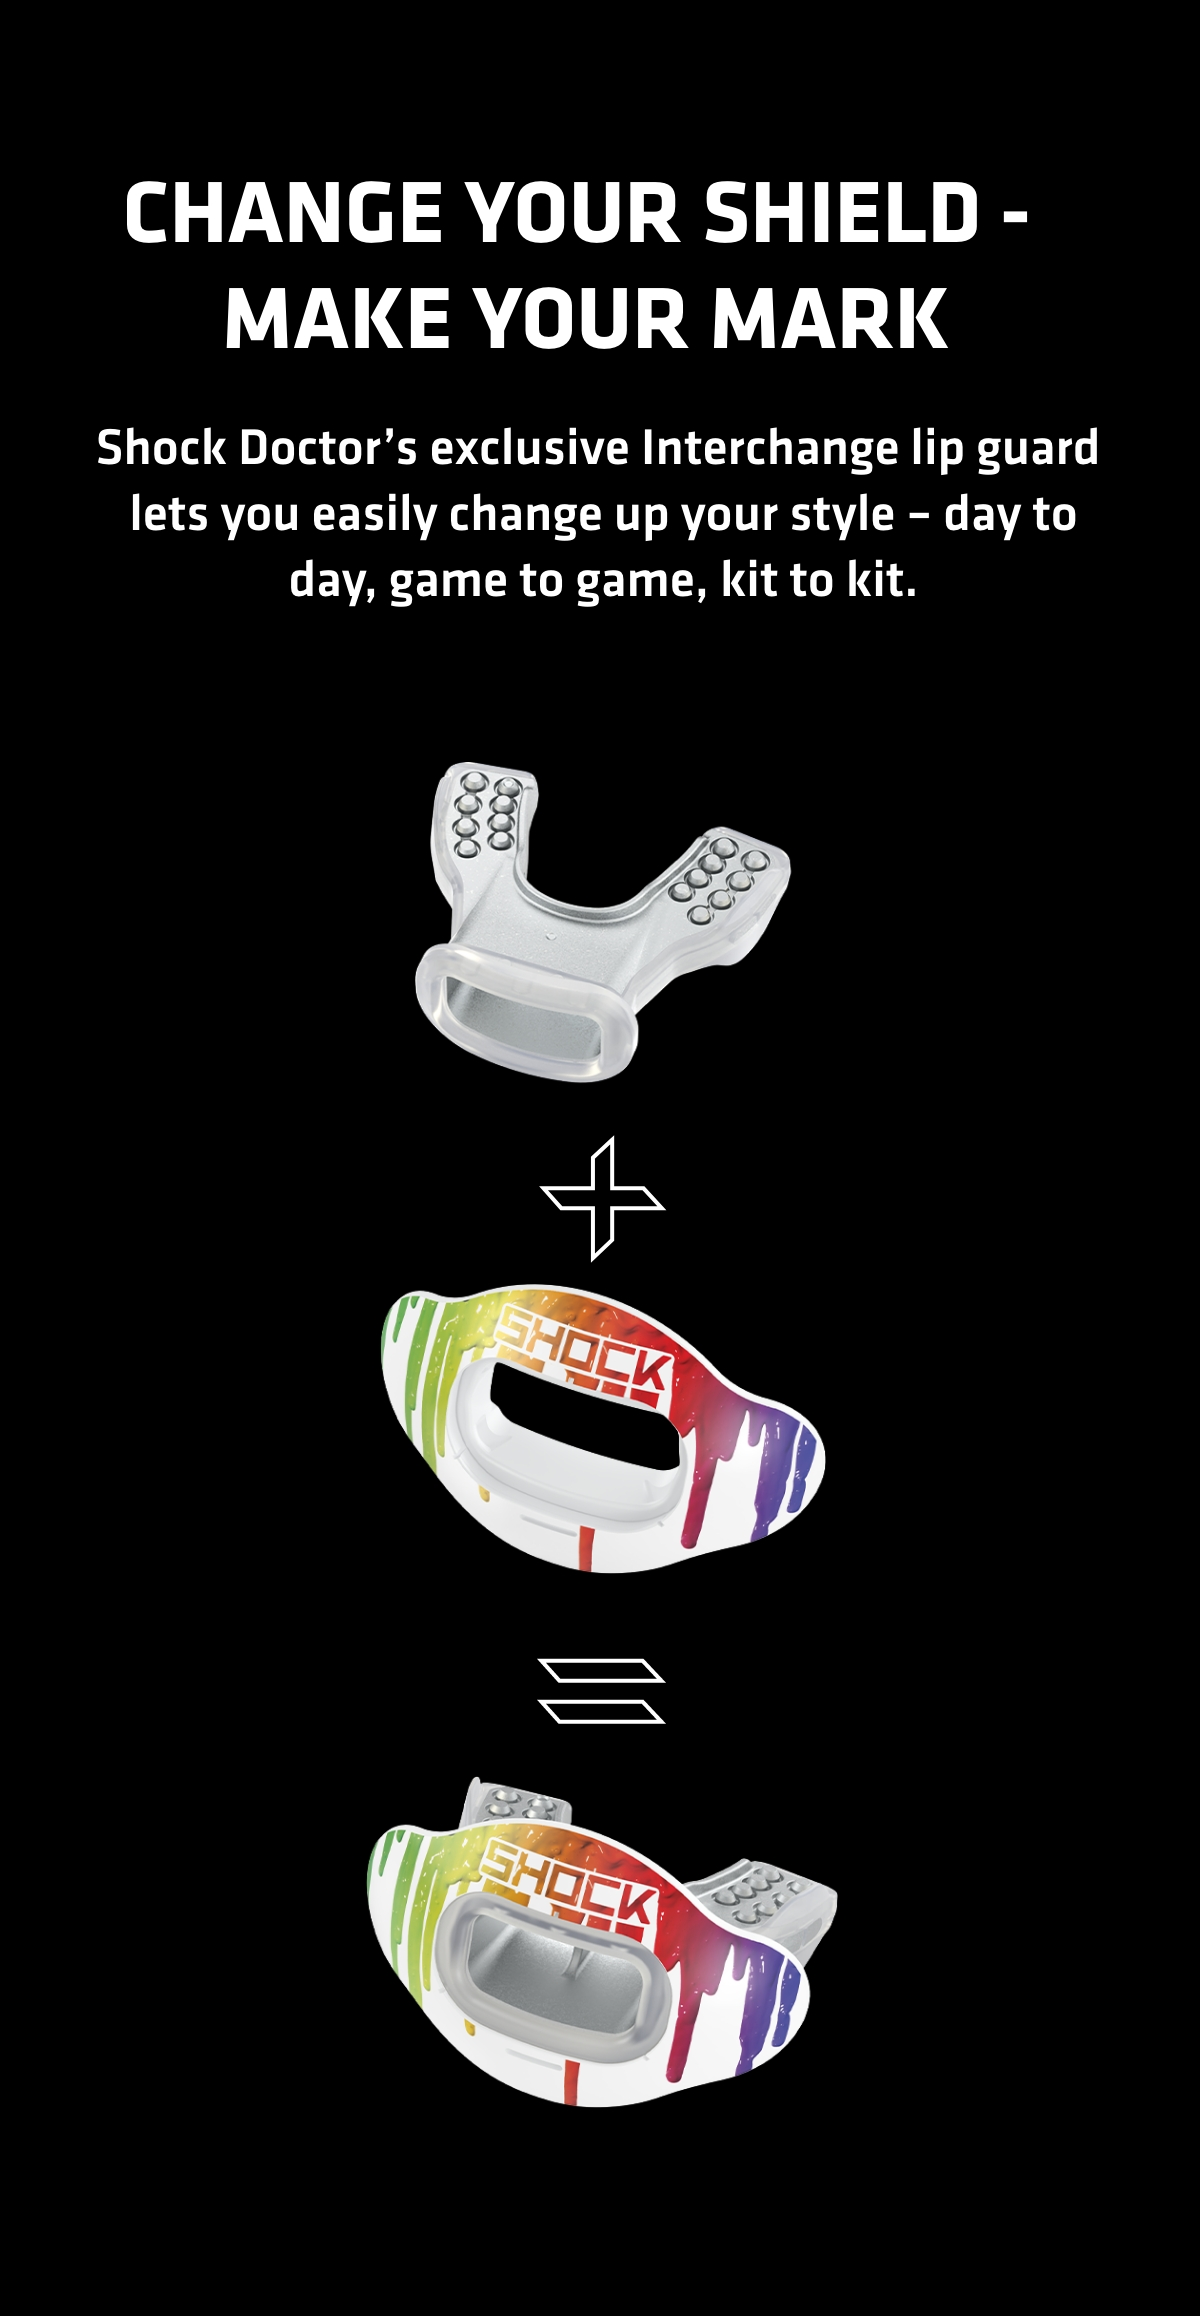 Change your shield - make your mark. SHock Doctor's exlcusive interchange lip guard lets you easily change up your style - day to day, game to game, kit to kit.